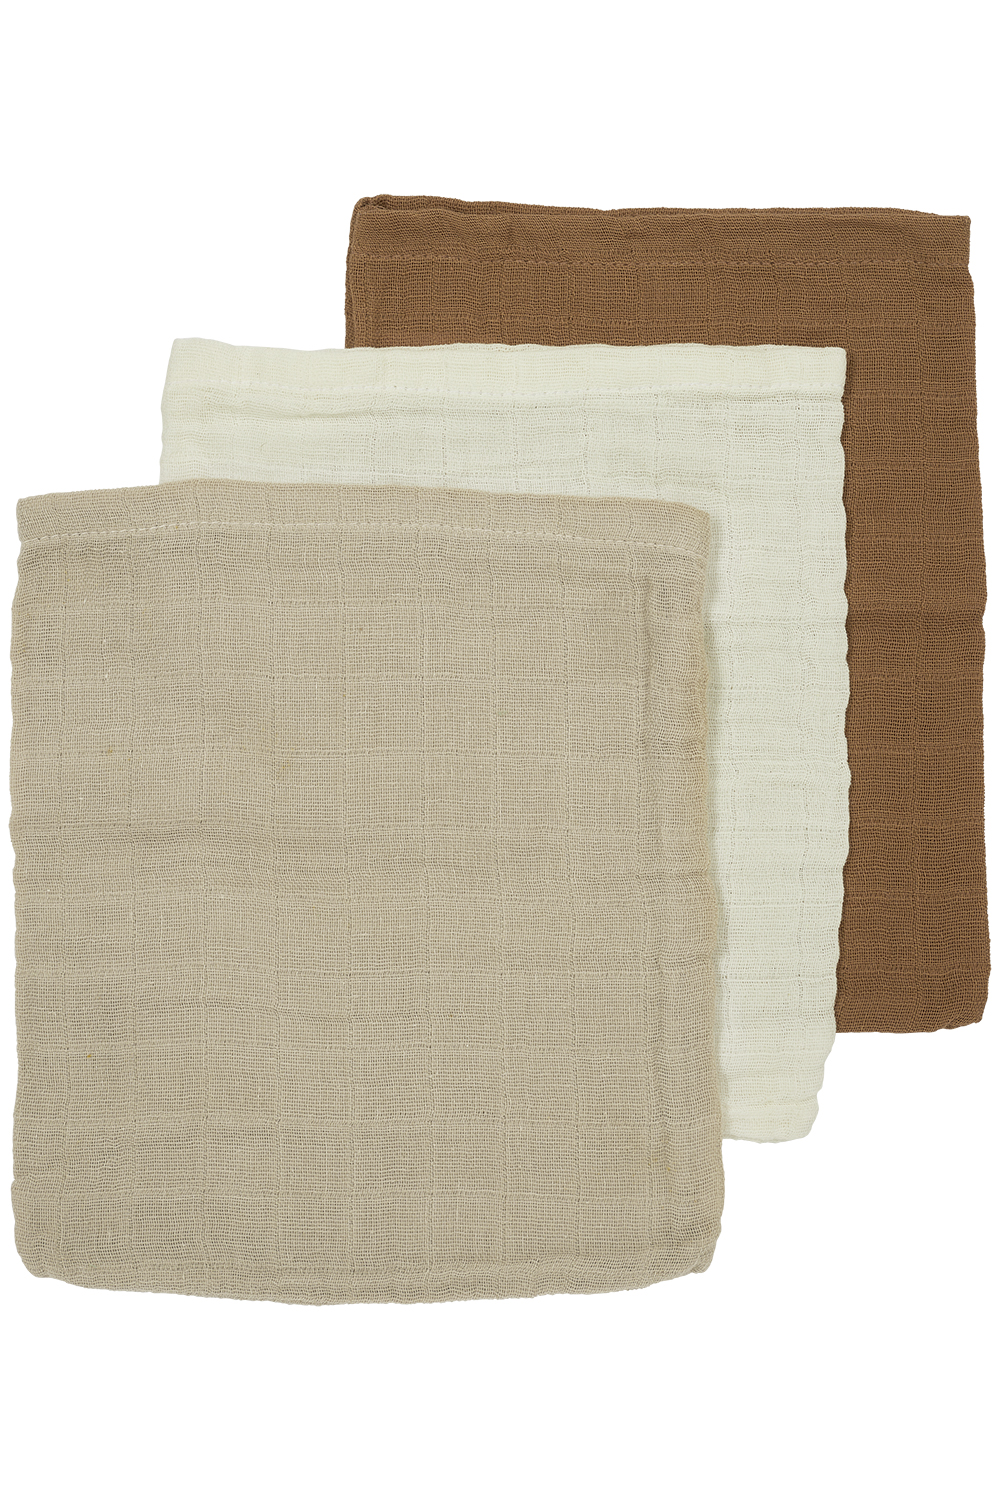 Waschhandschuhe 3er pack pre-washed musselin Uni - offwhite/sand/toffee - 20x17cm